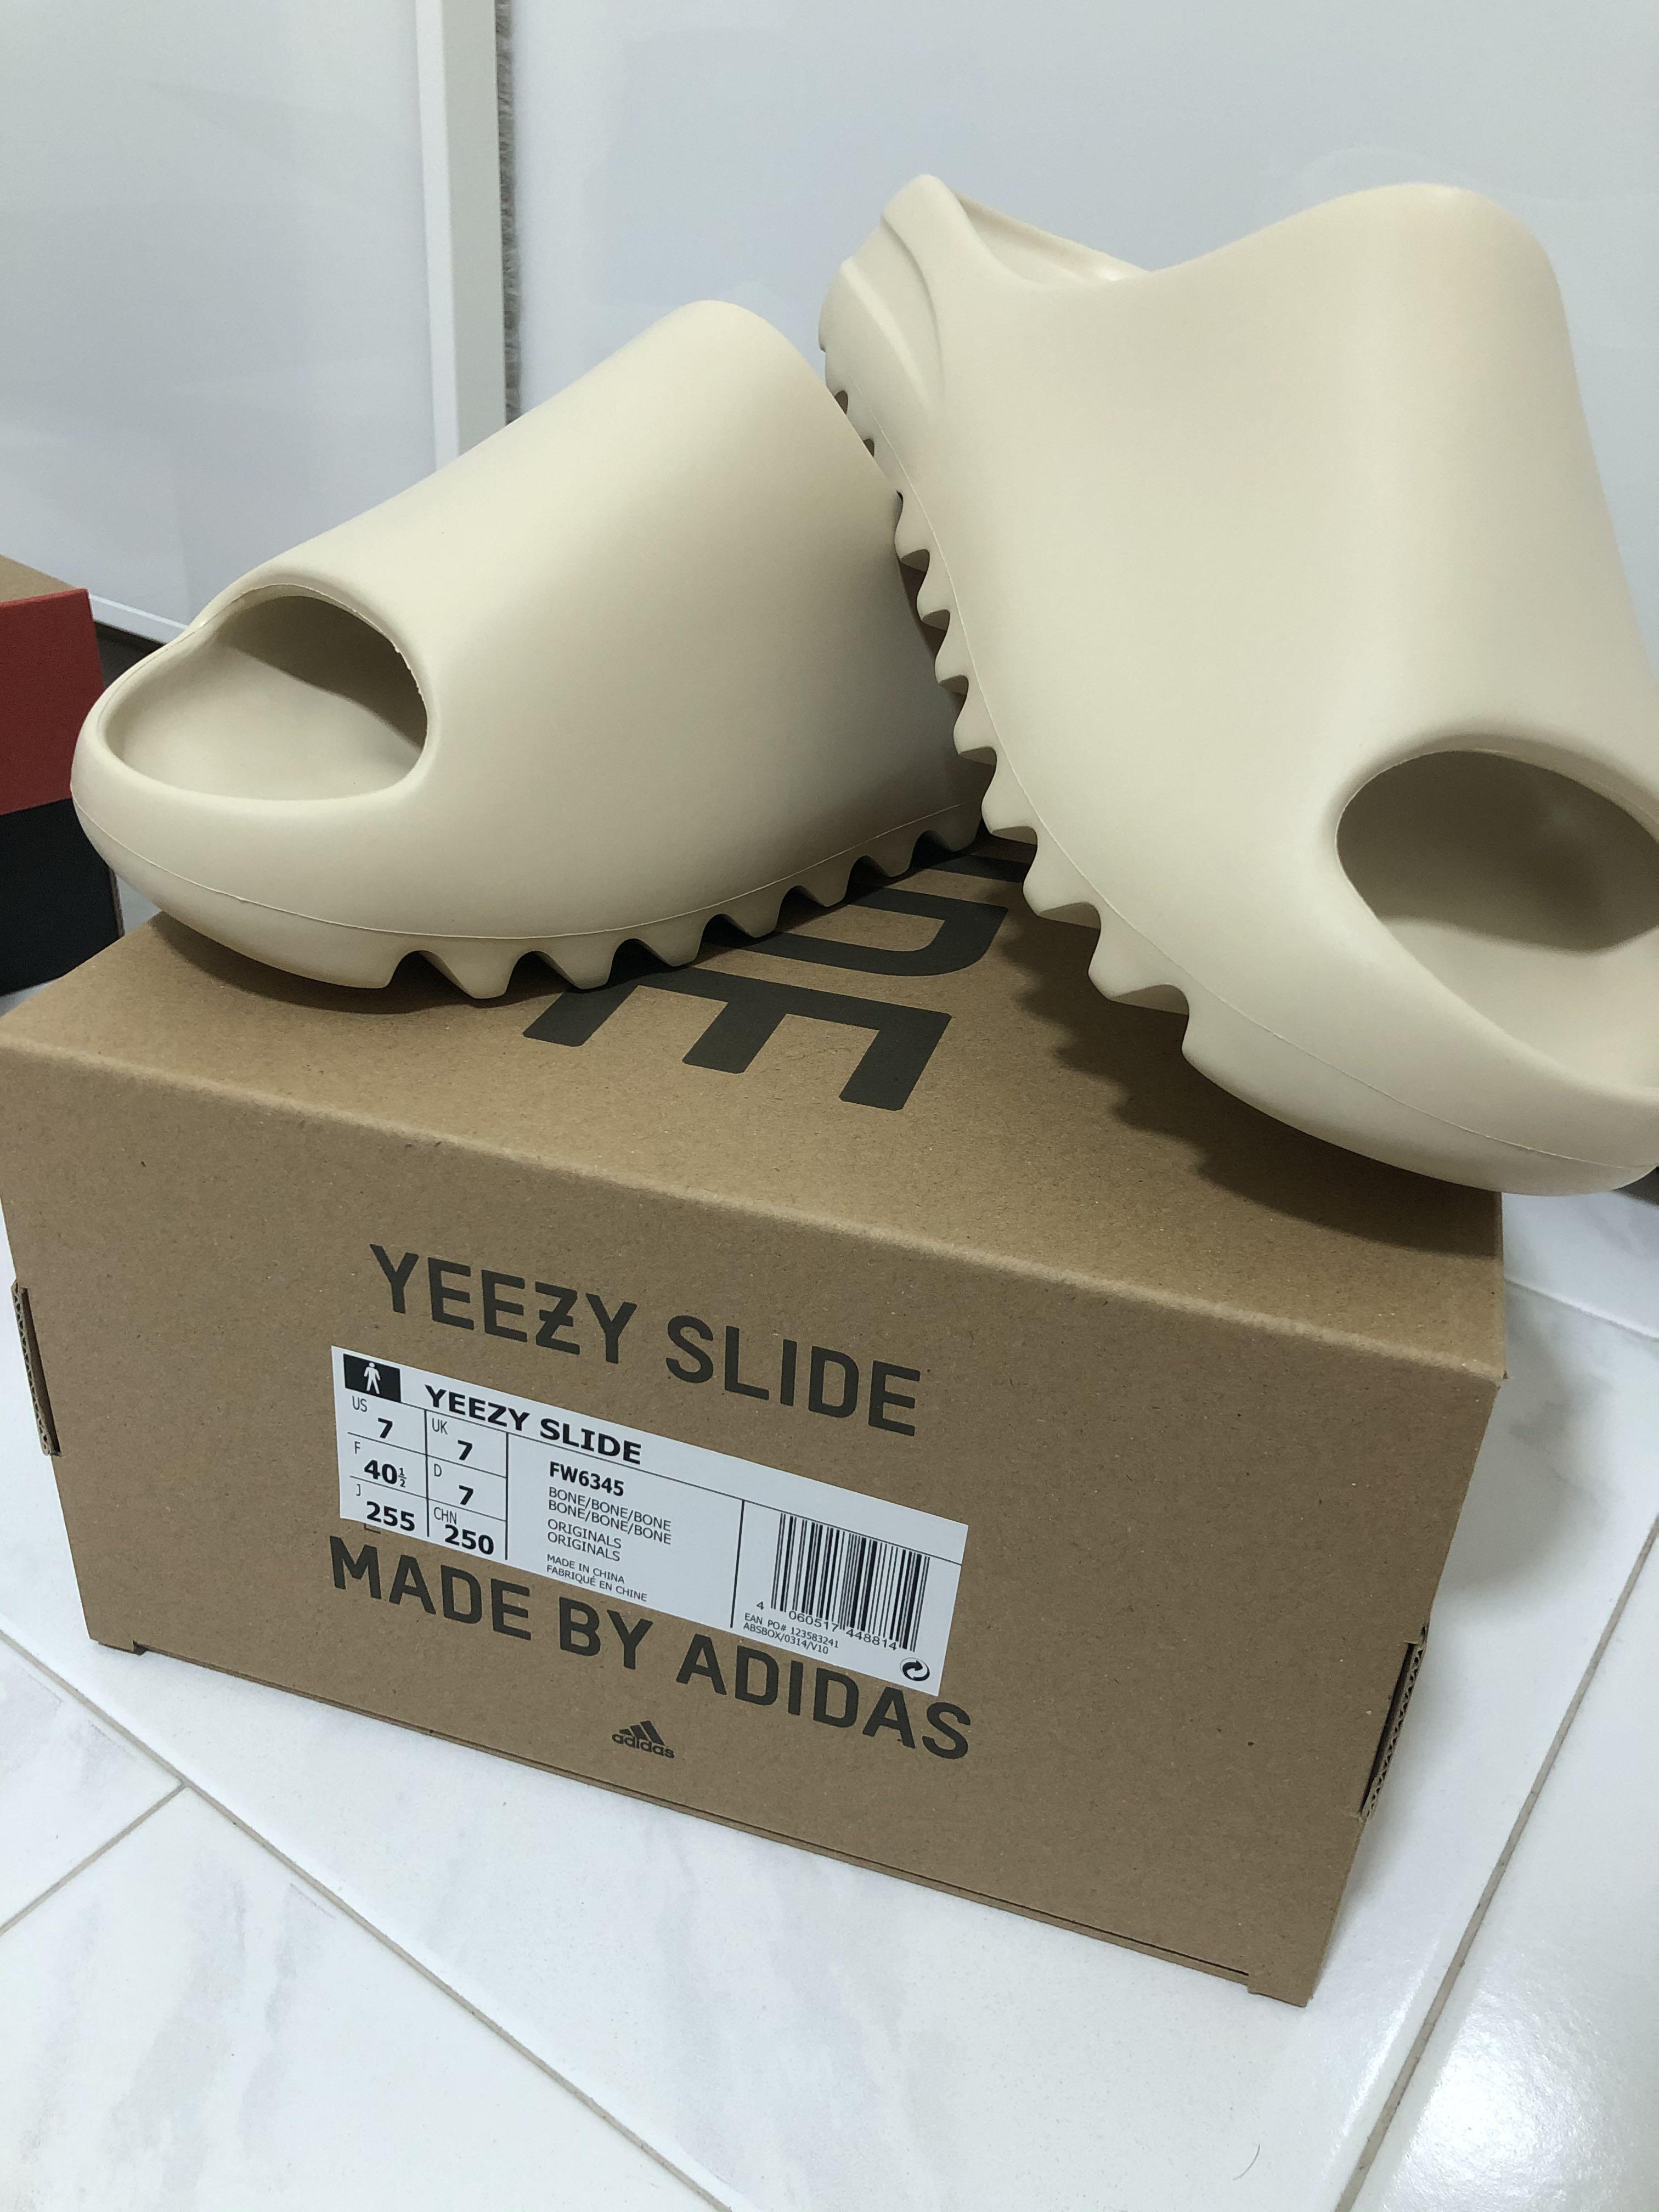 Adidas Yeezy Slide Size 11 tan new no .5 Size. Grailed